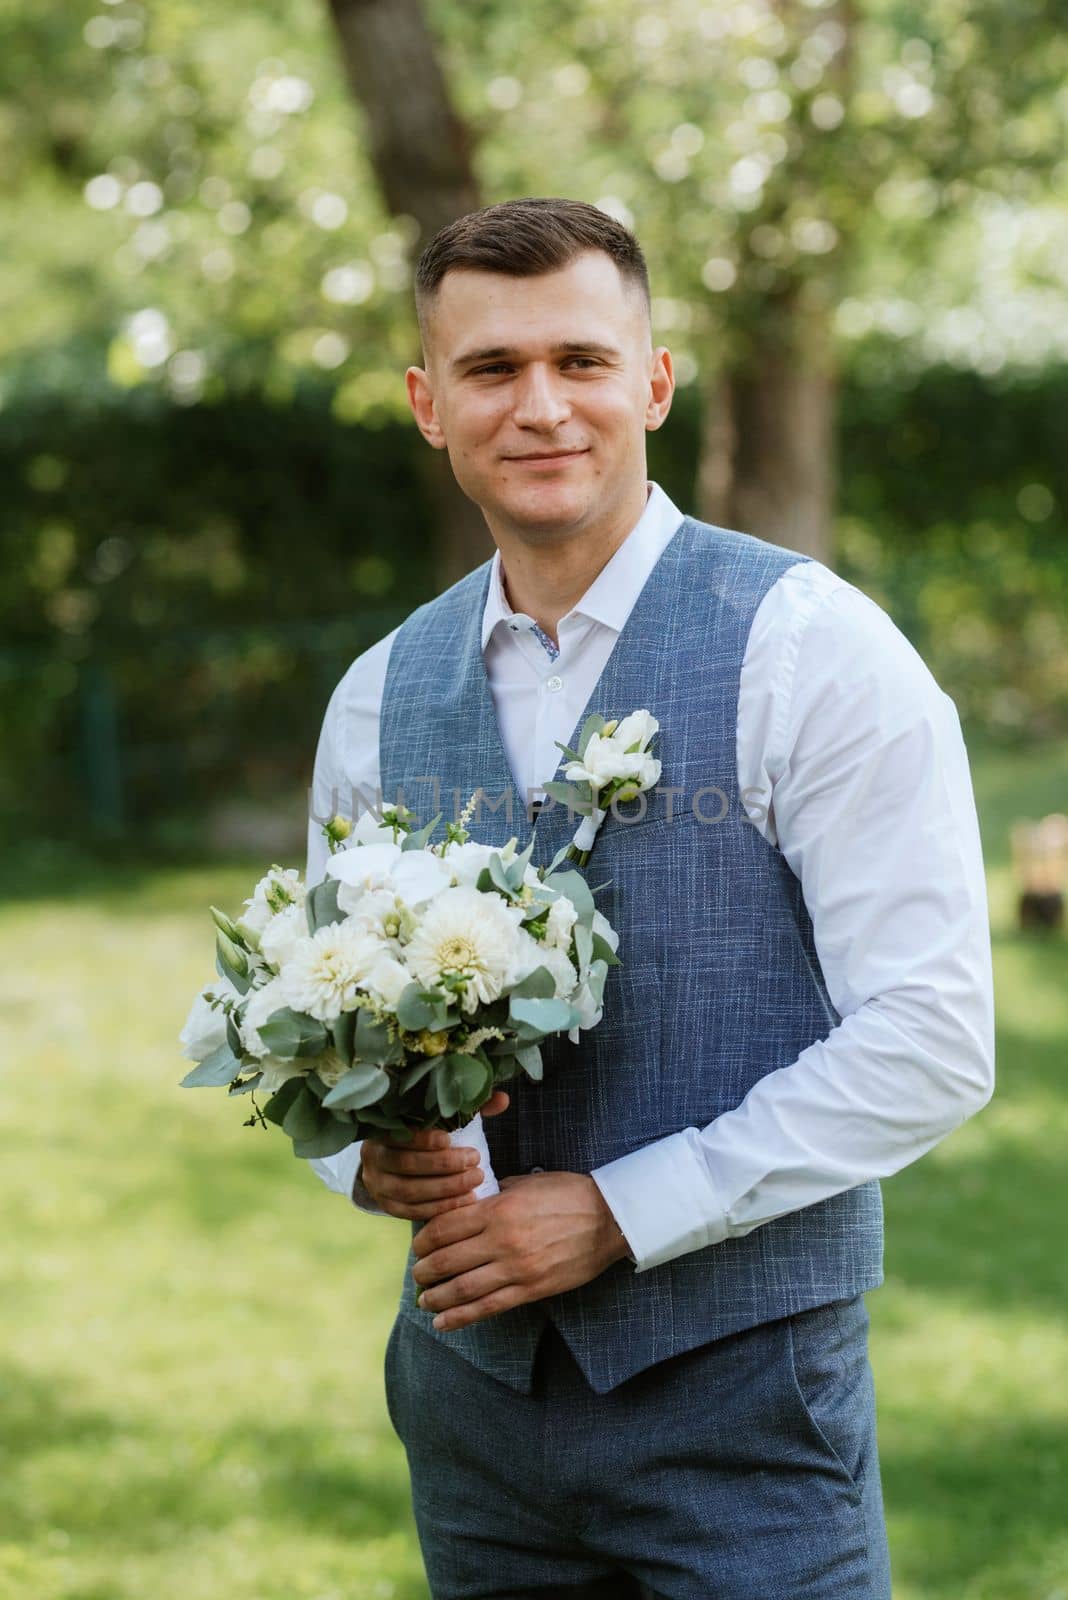 portrait of the groom in a light gray suit outdoors